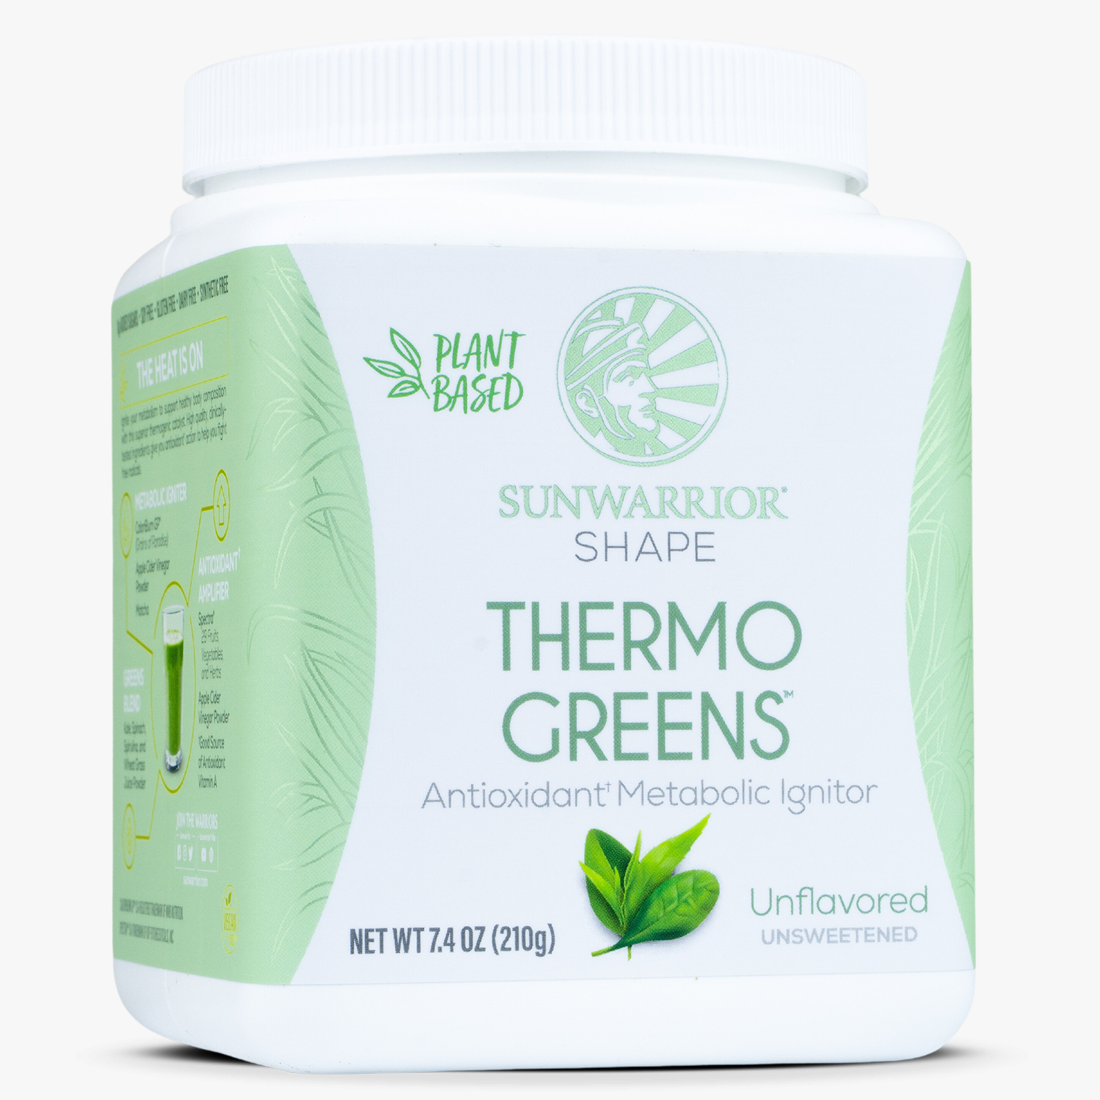 Sunwarrior Thermo Greens Unflavored, 7.4 oz